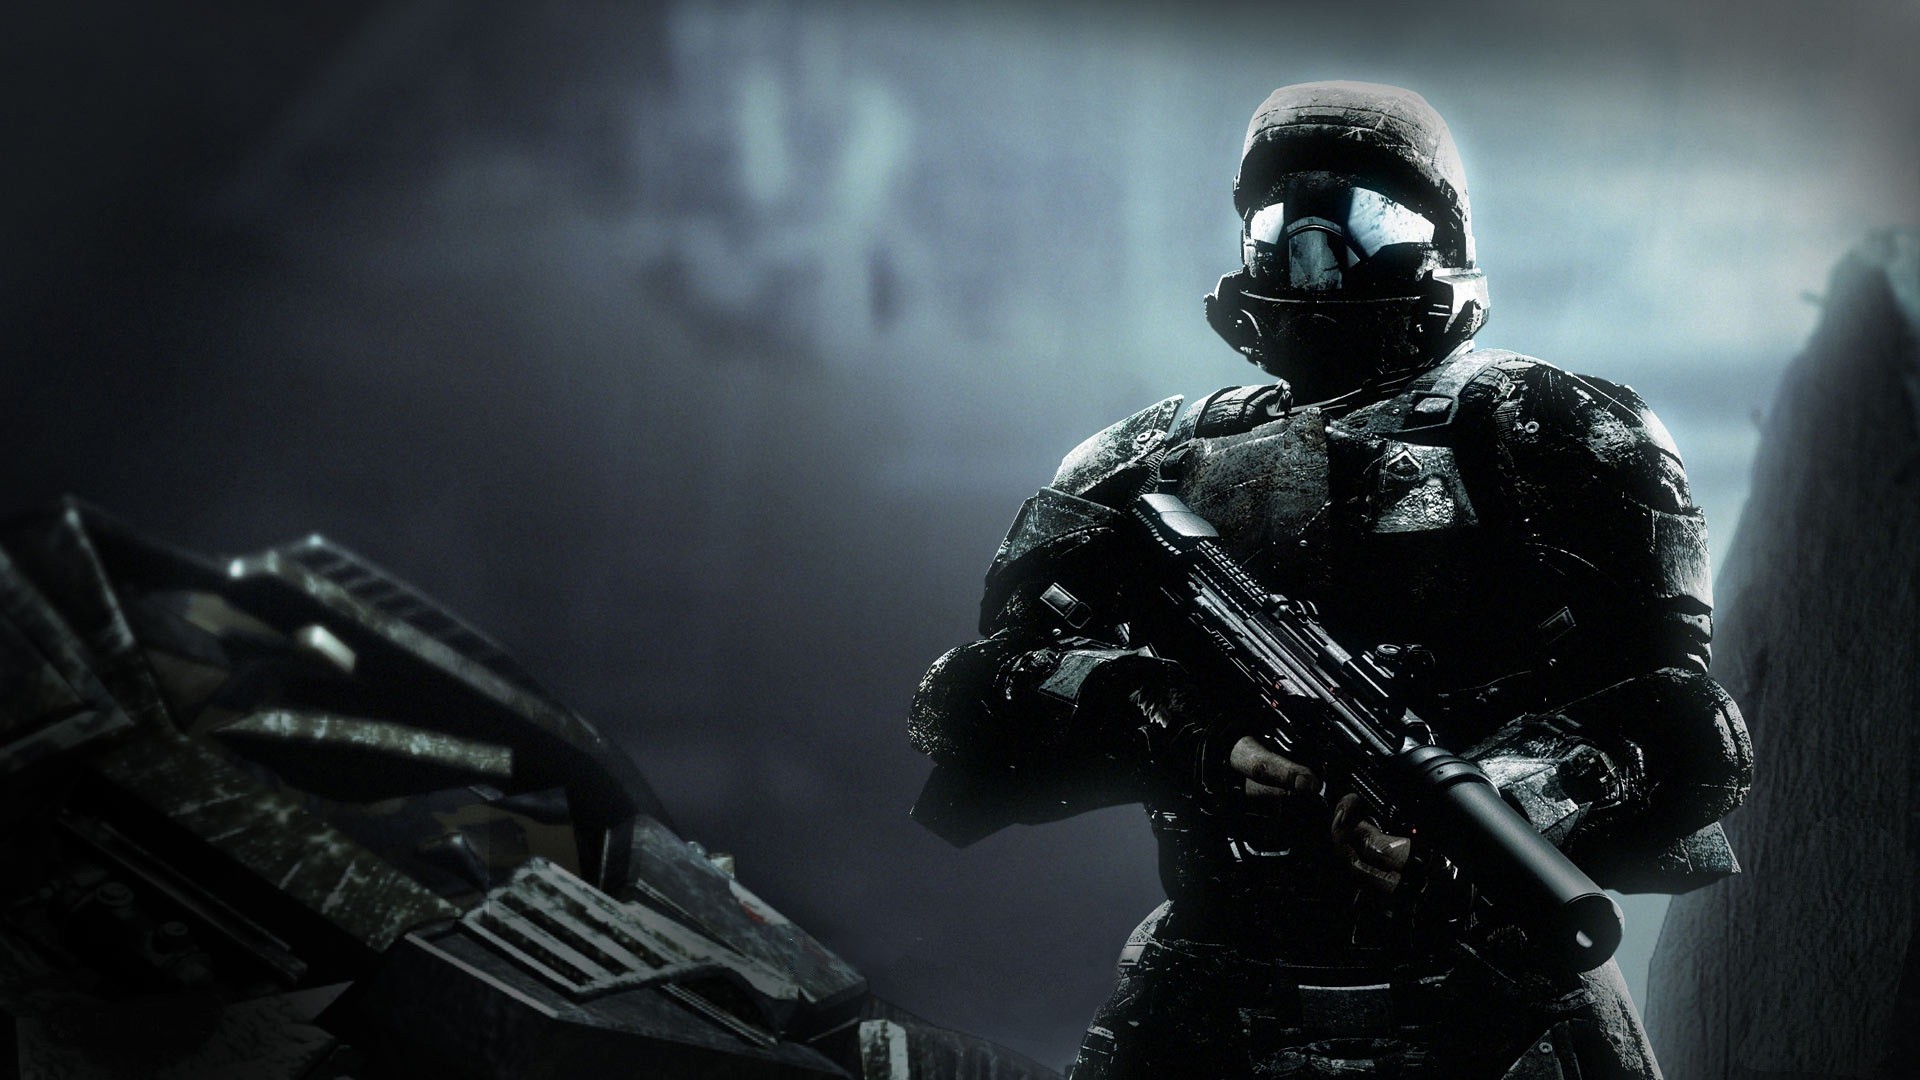 Halo 3: ODST Wallpapers HD / Desktop and Mobile Backgrounds